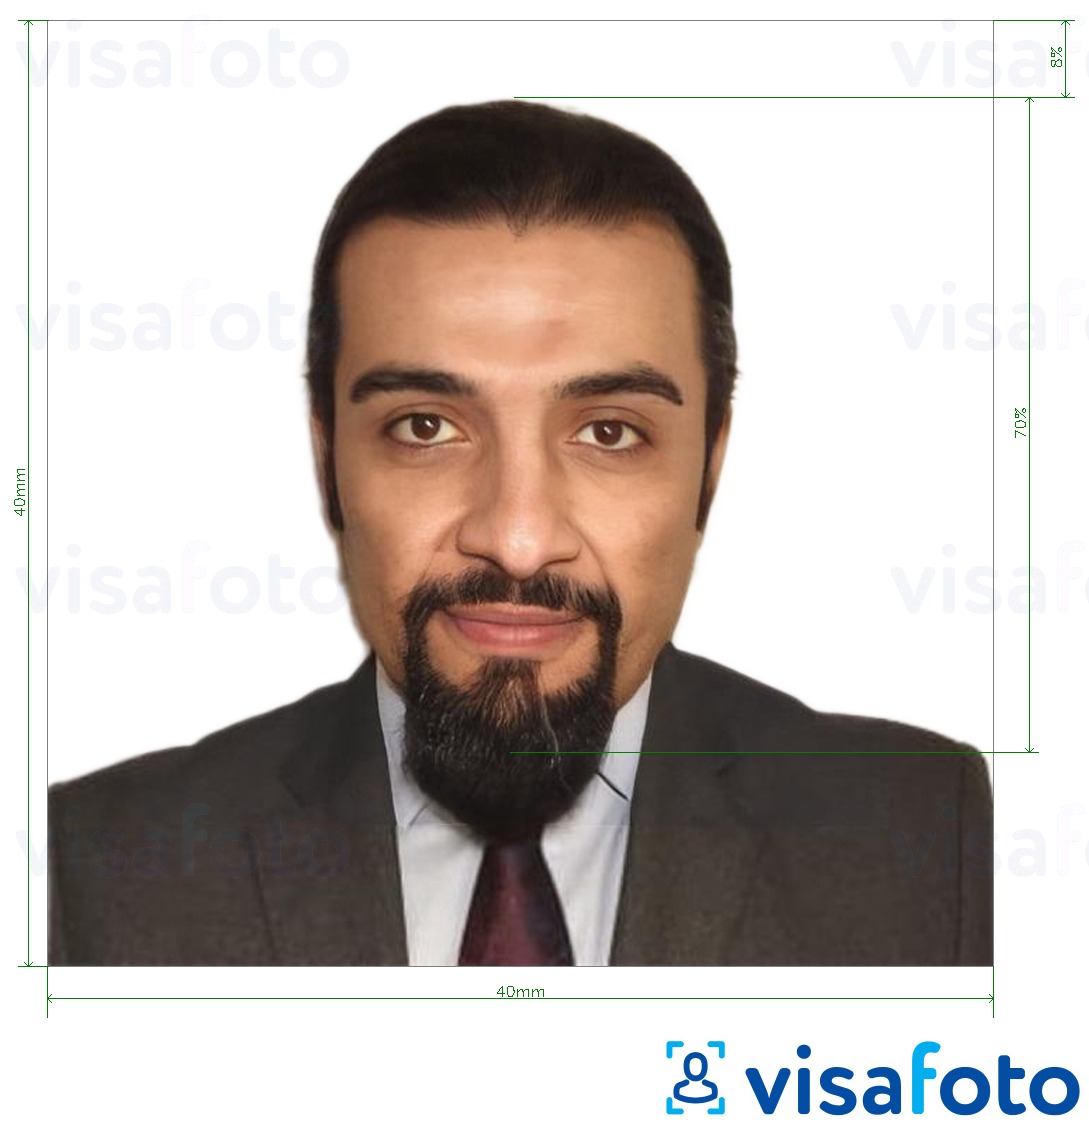 Example of photo for Syria passport 40x40 mm with exact size specification